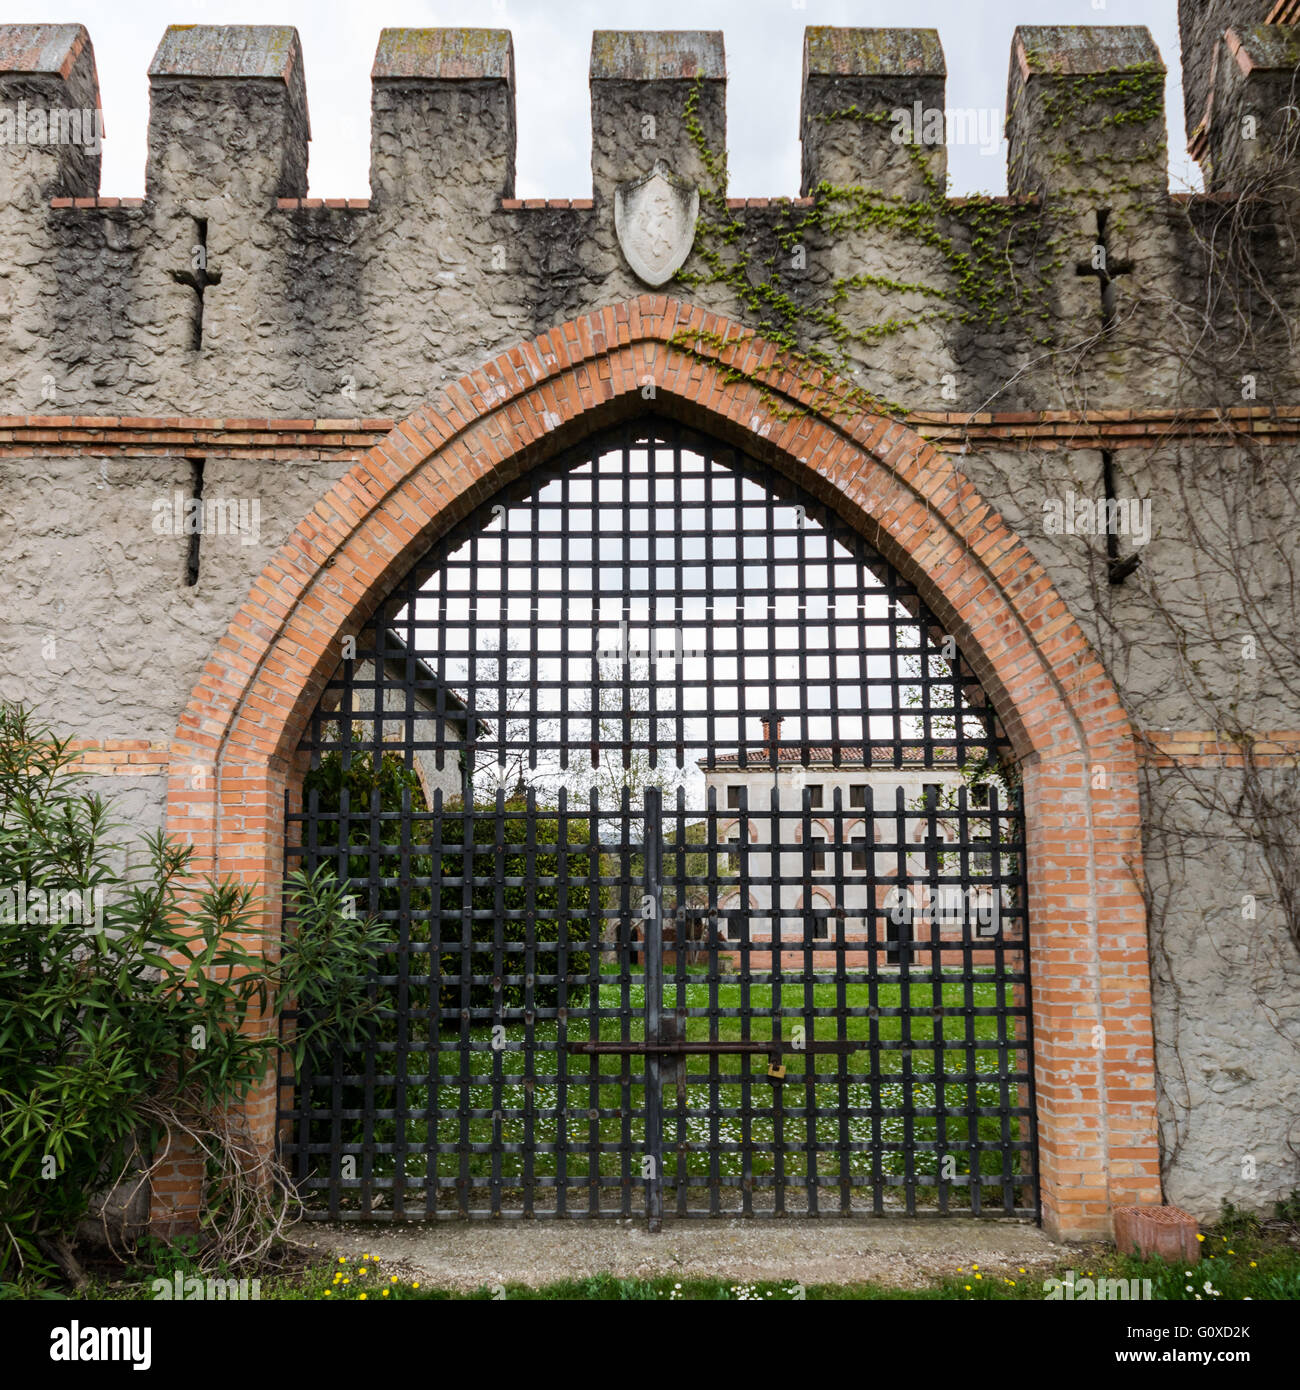 arched entrance of a medieval castle closed by an iron grille gate